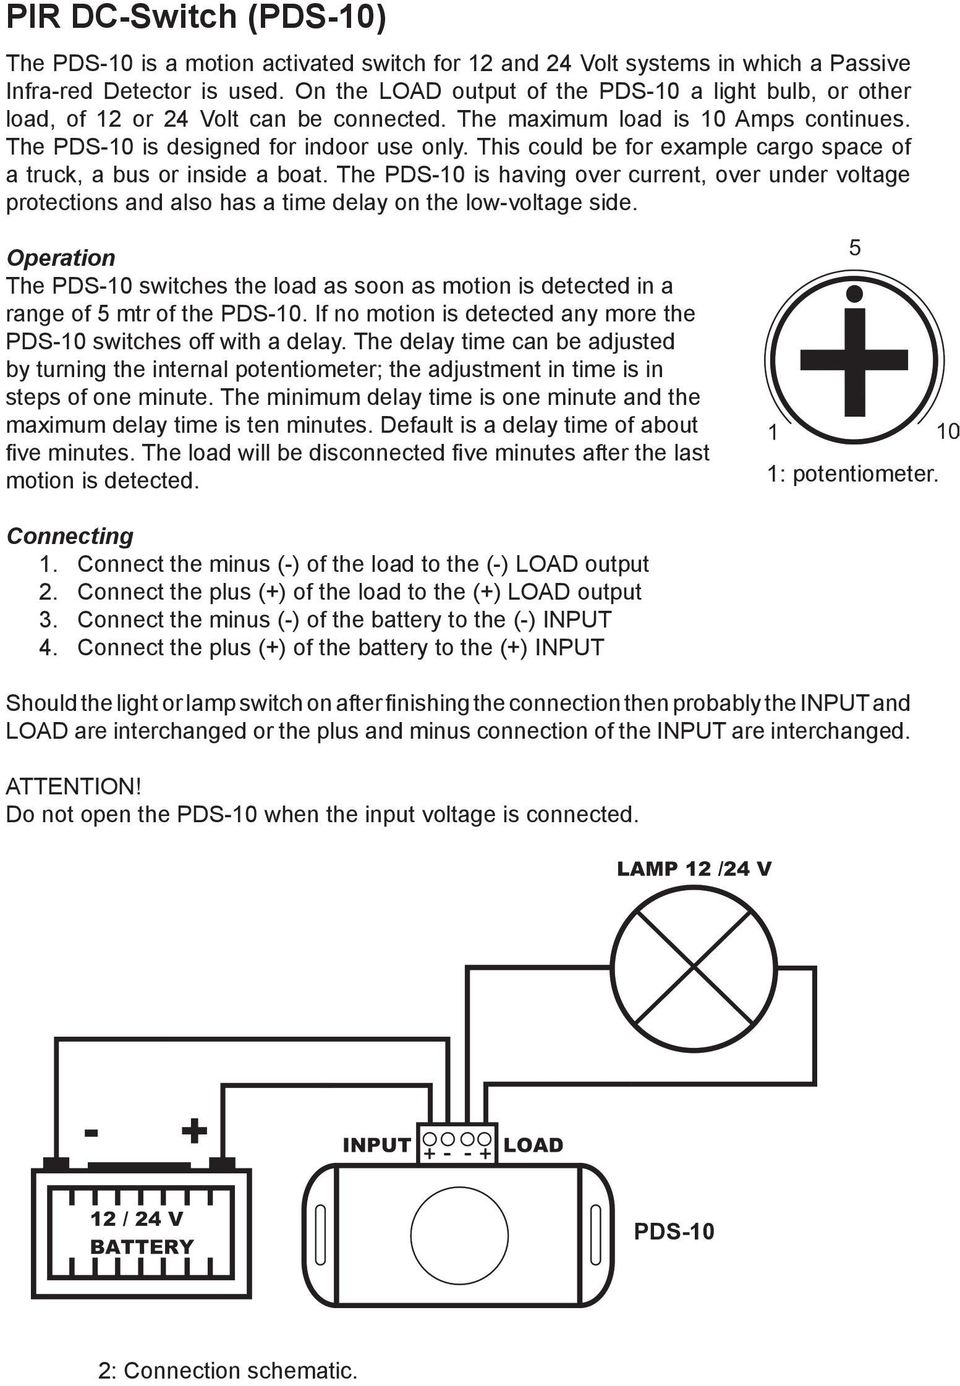 This could be for example cargo space of a truck, a bus or inside a boat. The PDS-10 is having over current, over under voltage protections and also has a time delay on the low-voltage side.